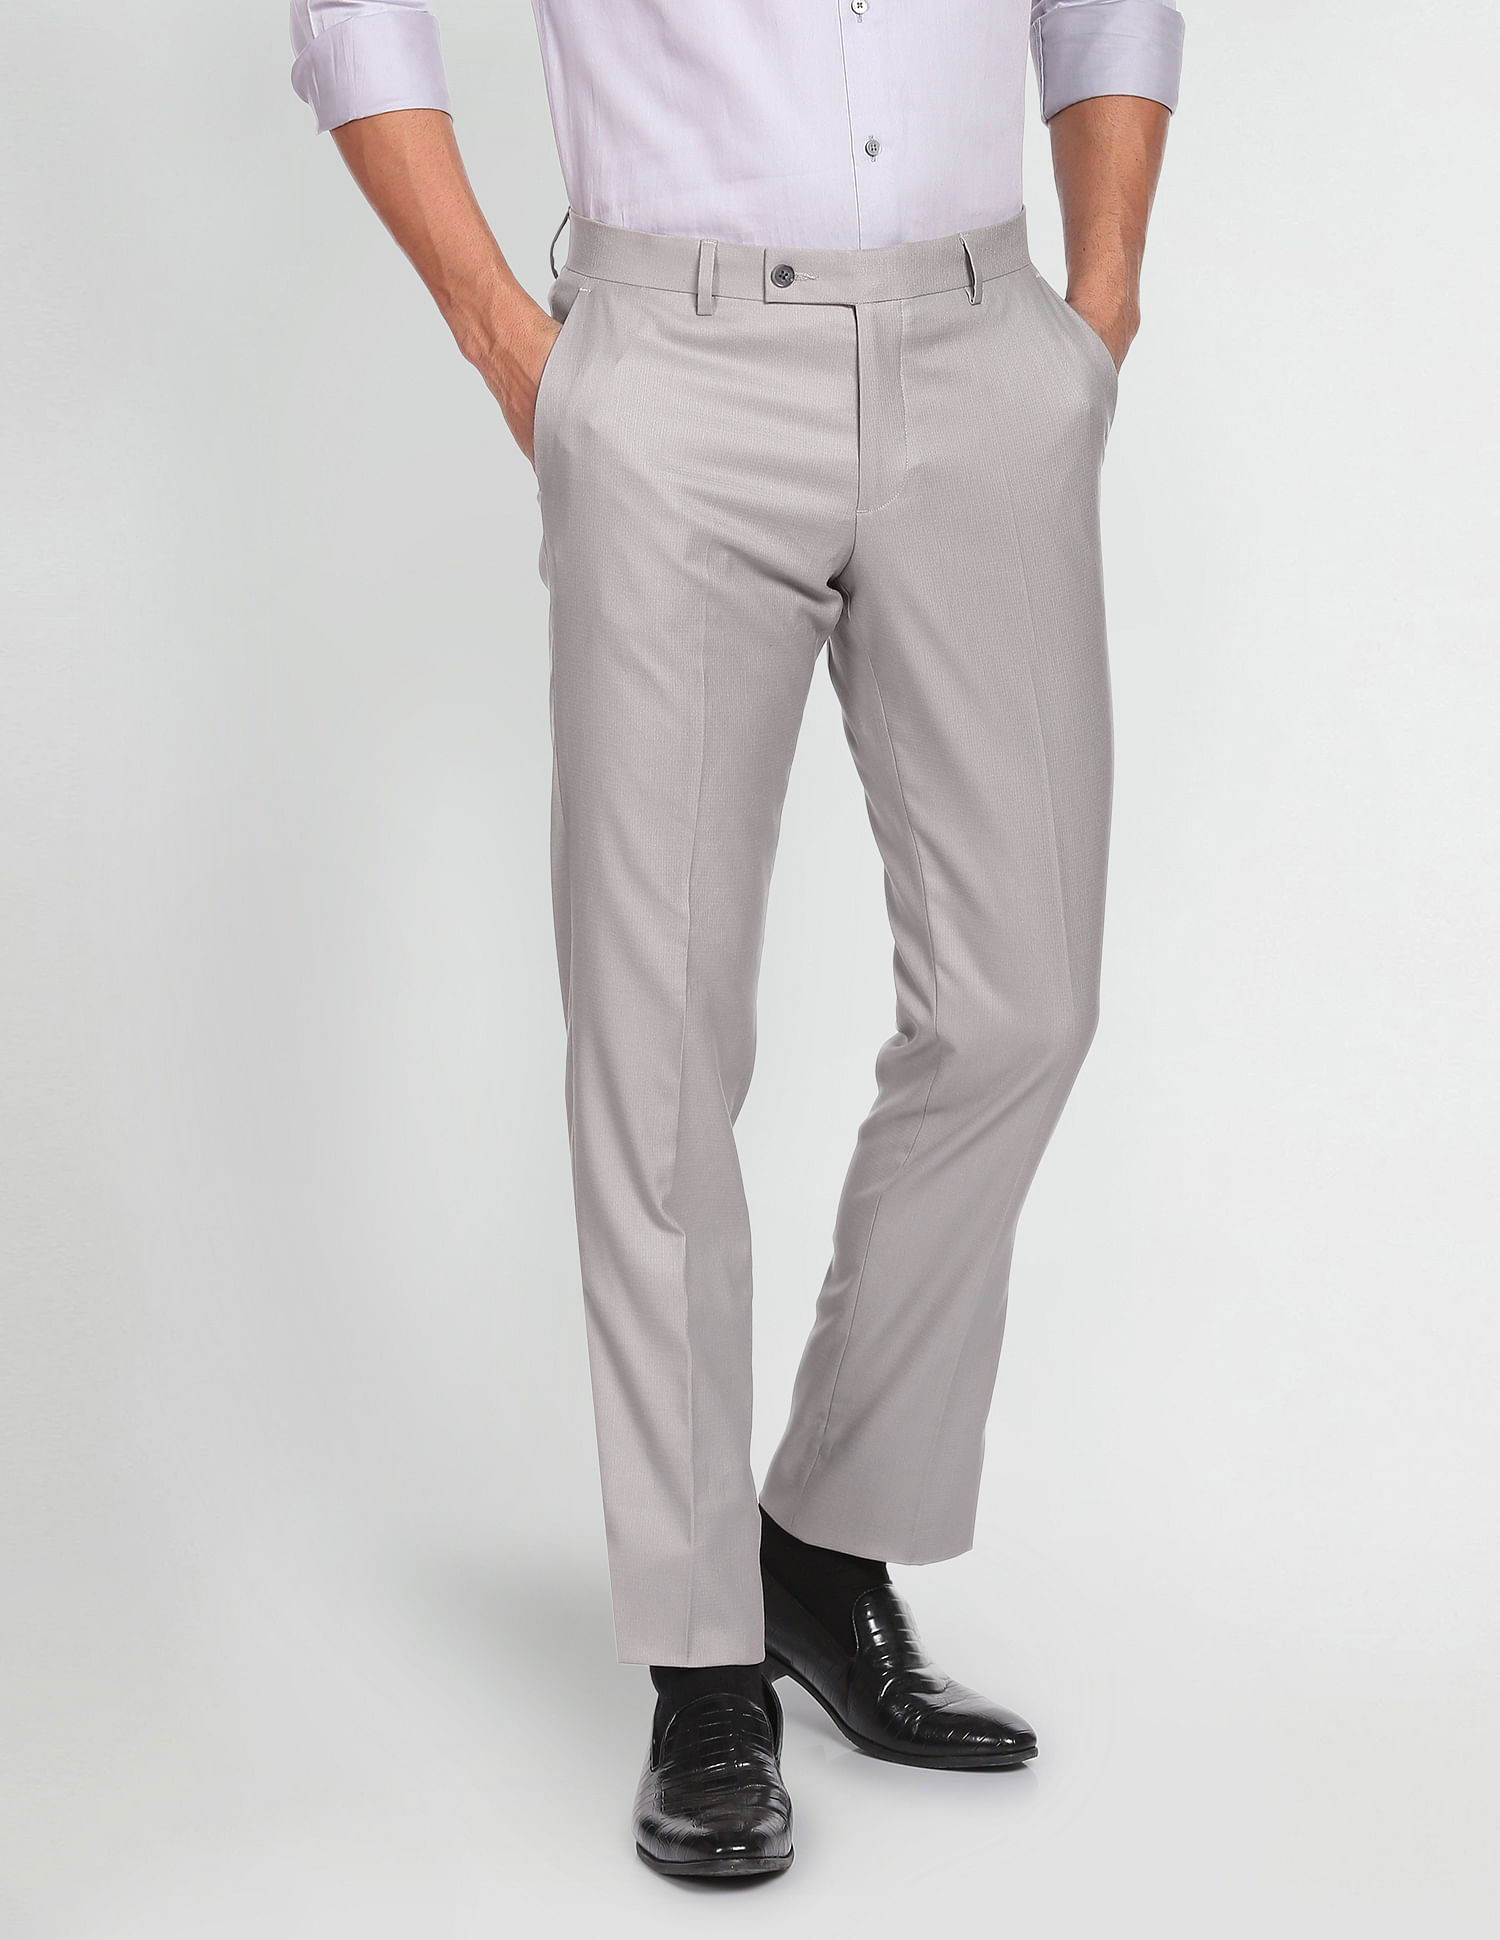 Buy Arrow Sports Slim Fit Textured Trousers Online